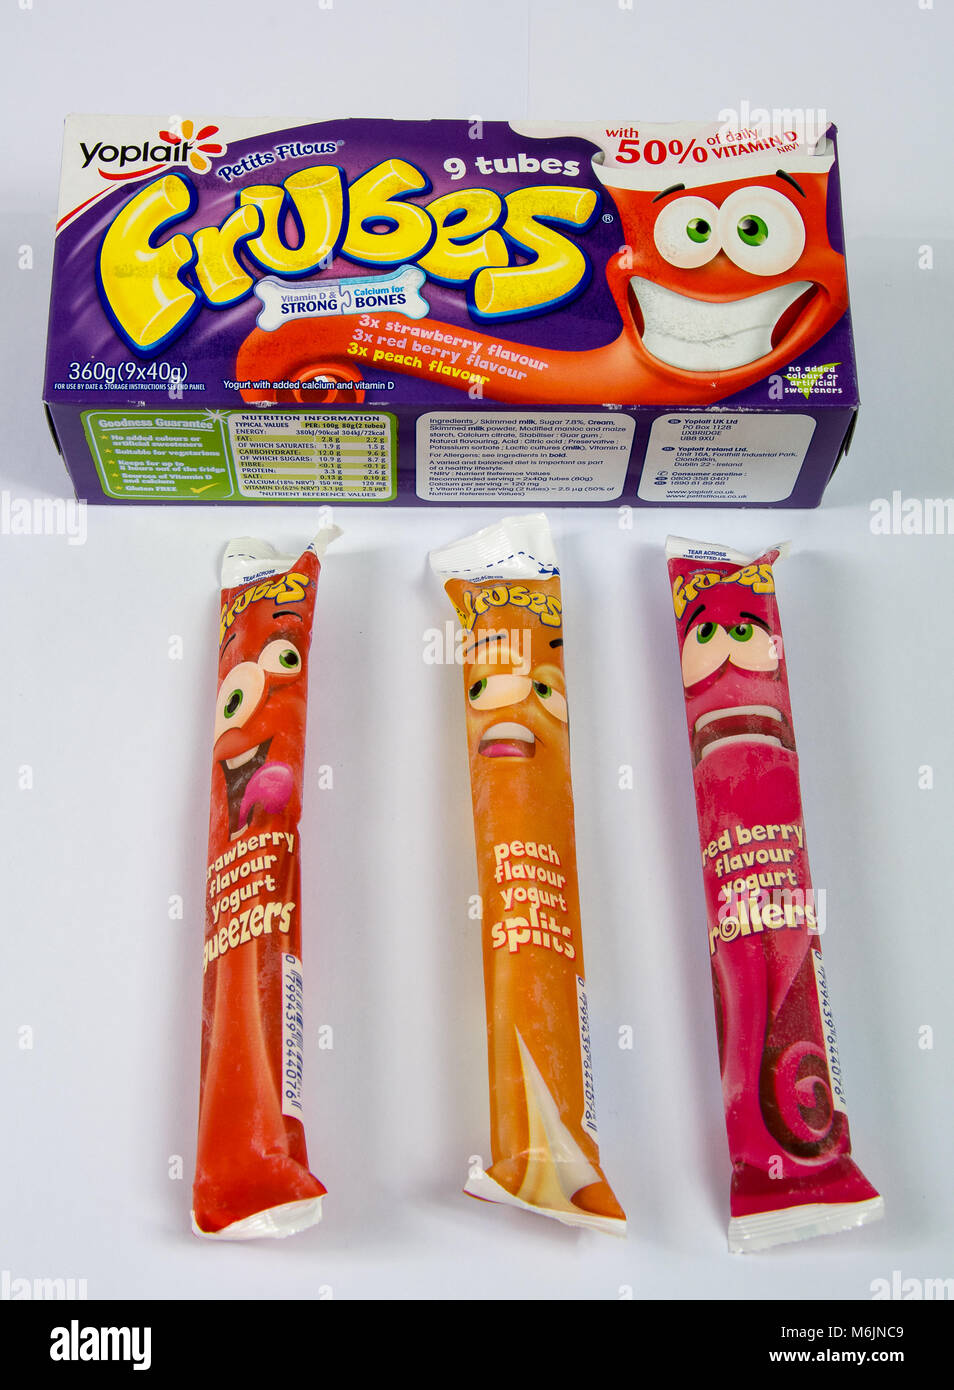 CHESTER, UK - MARCH 4TH 2018: Box and tubes of Yoplait Frubes Petits Filous yoghurt Stock Photo